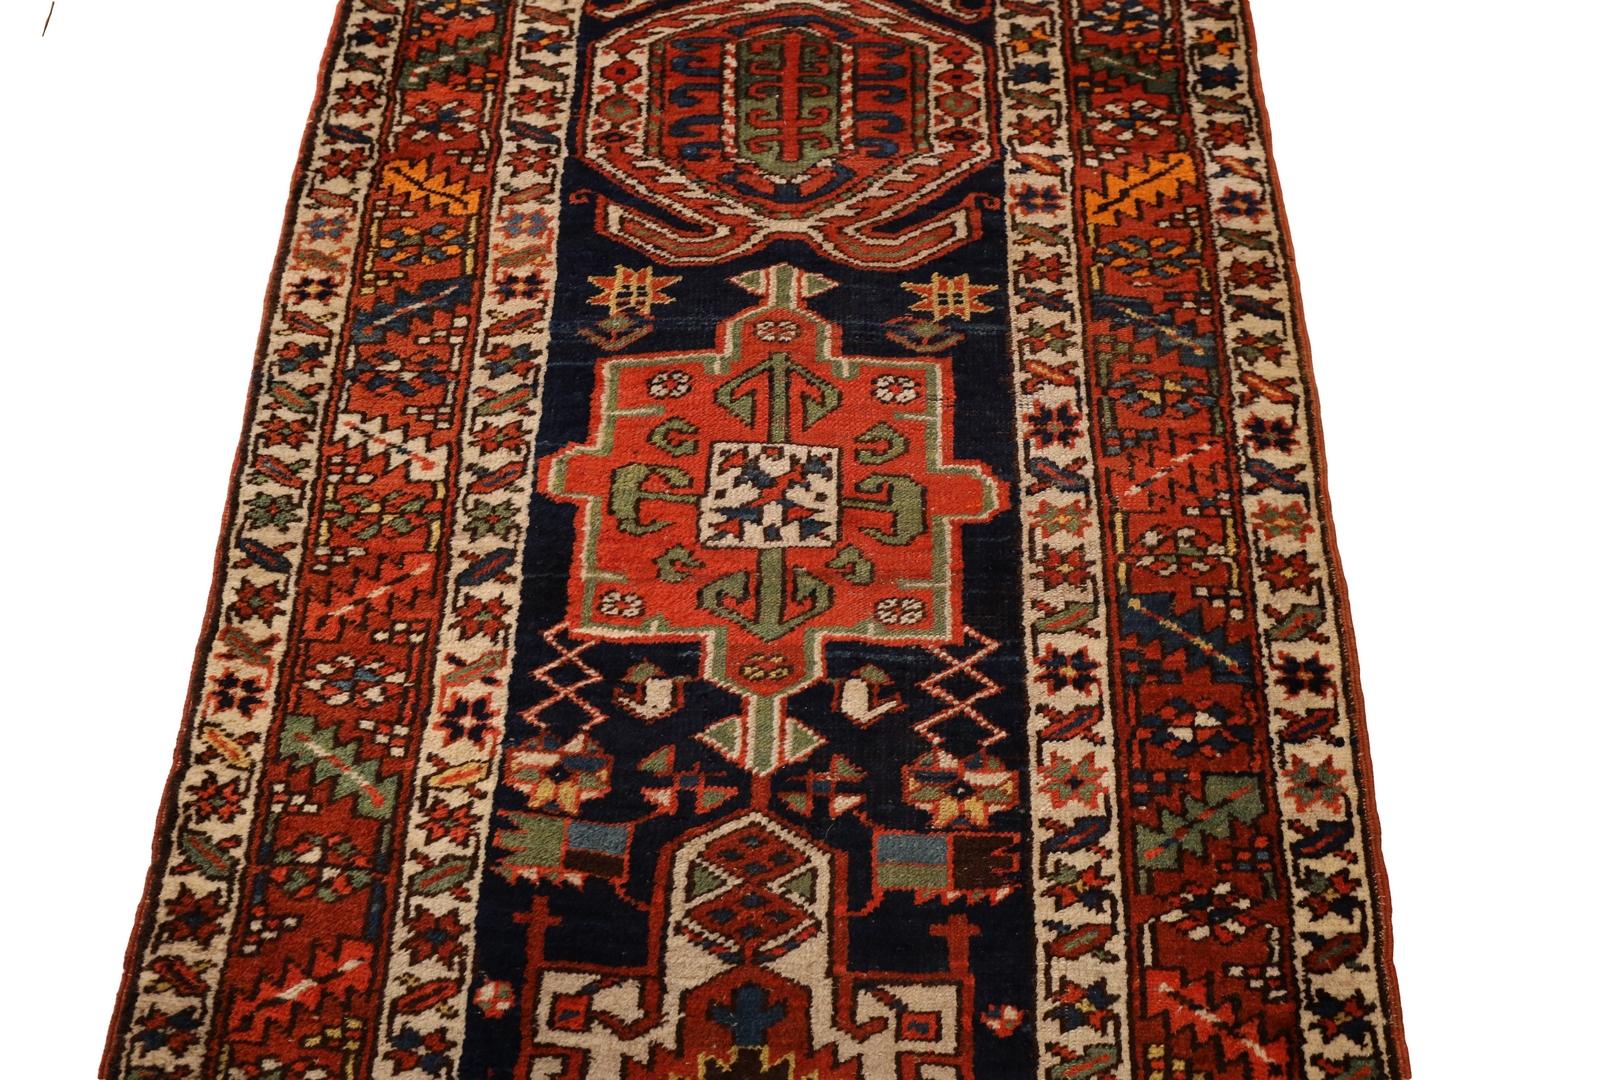 Hand-Knotted Karejeh Semi-Antique runner - 3'2